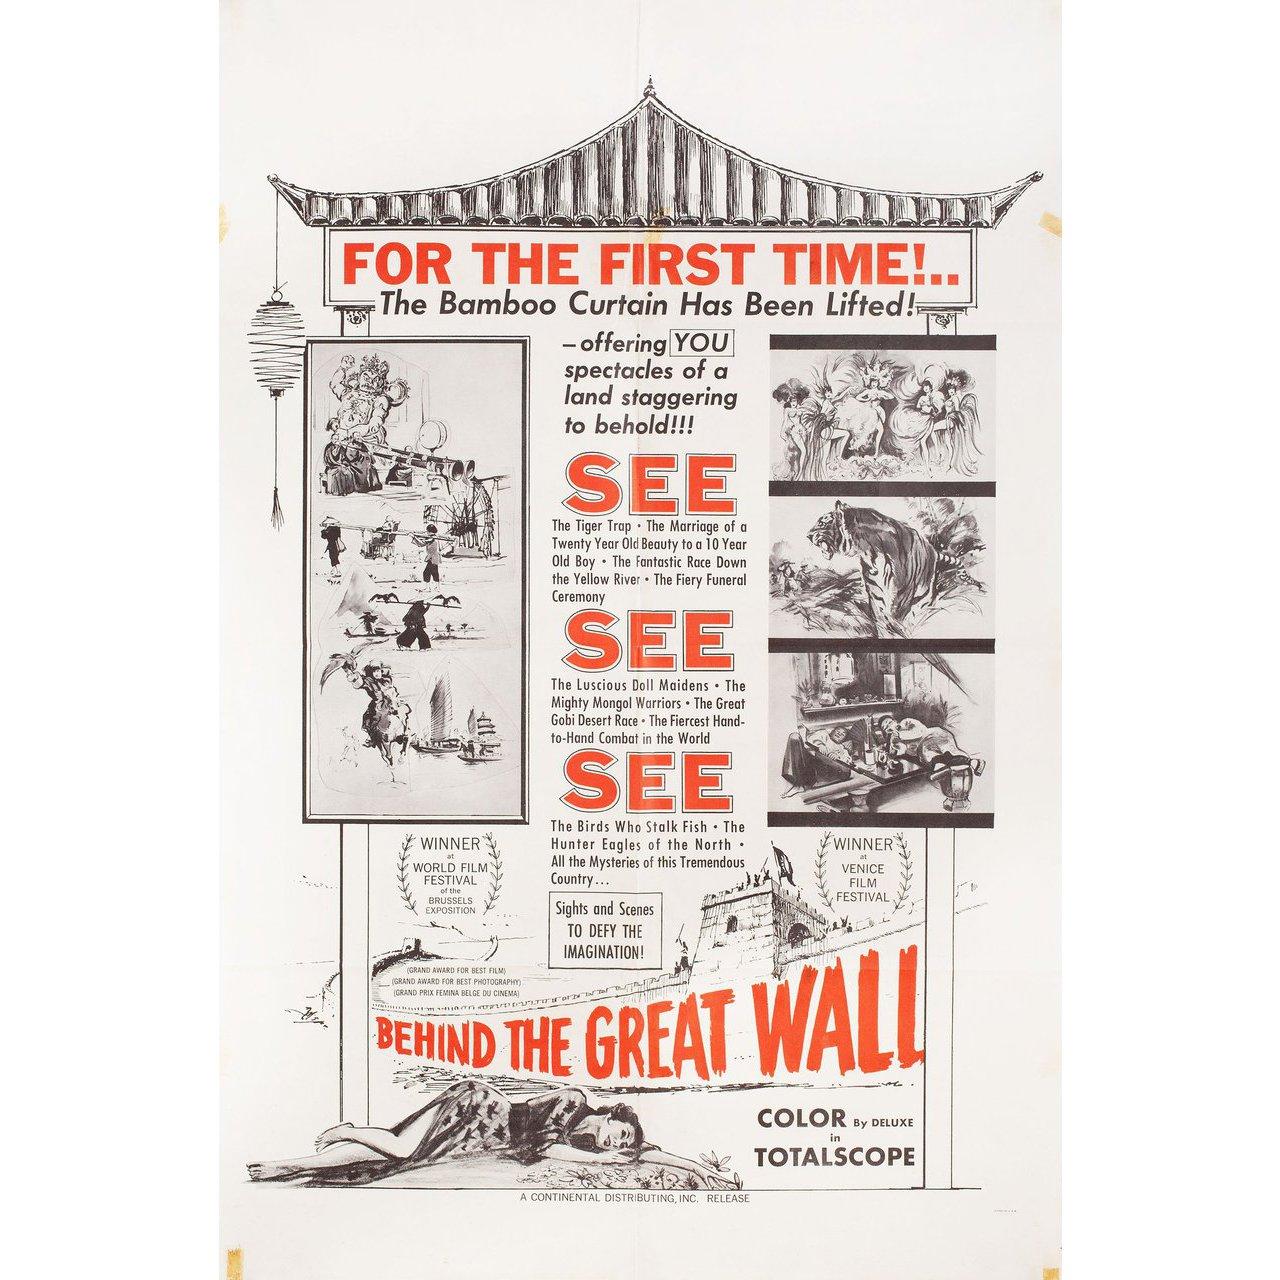 Original 1958 U.S. one sheet poster for the documentary film “Behind the Great Wall” (La Muraglia Cinese) directed by Carlo Lizzani with Giancarlo Vigorelli / Chet Huntley. Very good-fine condition, folded. Many original posters were issued folded